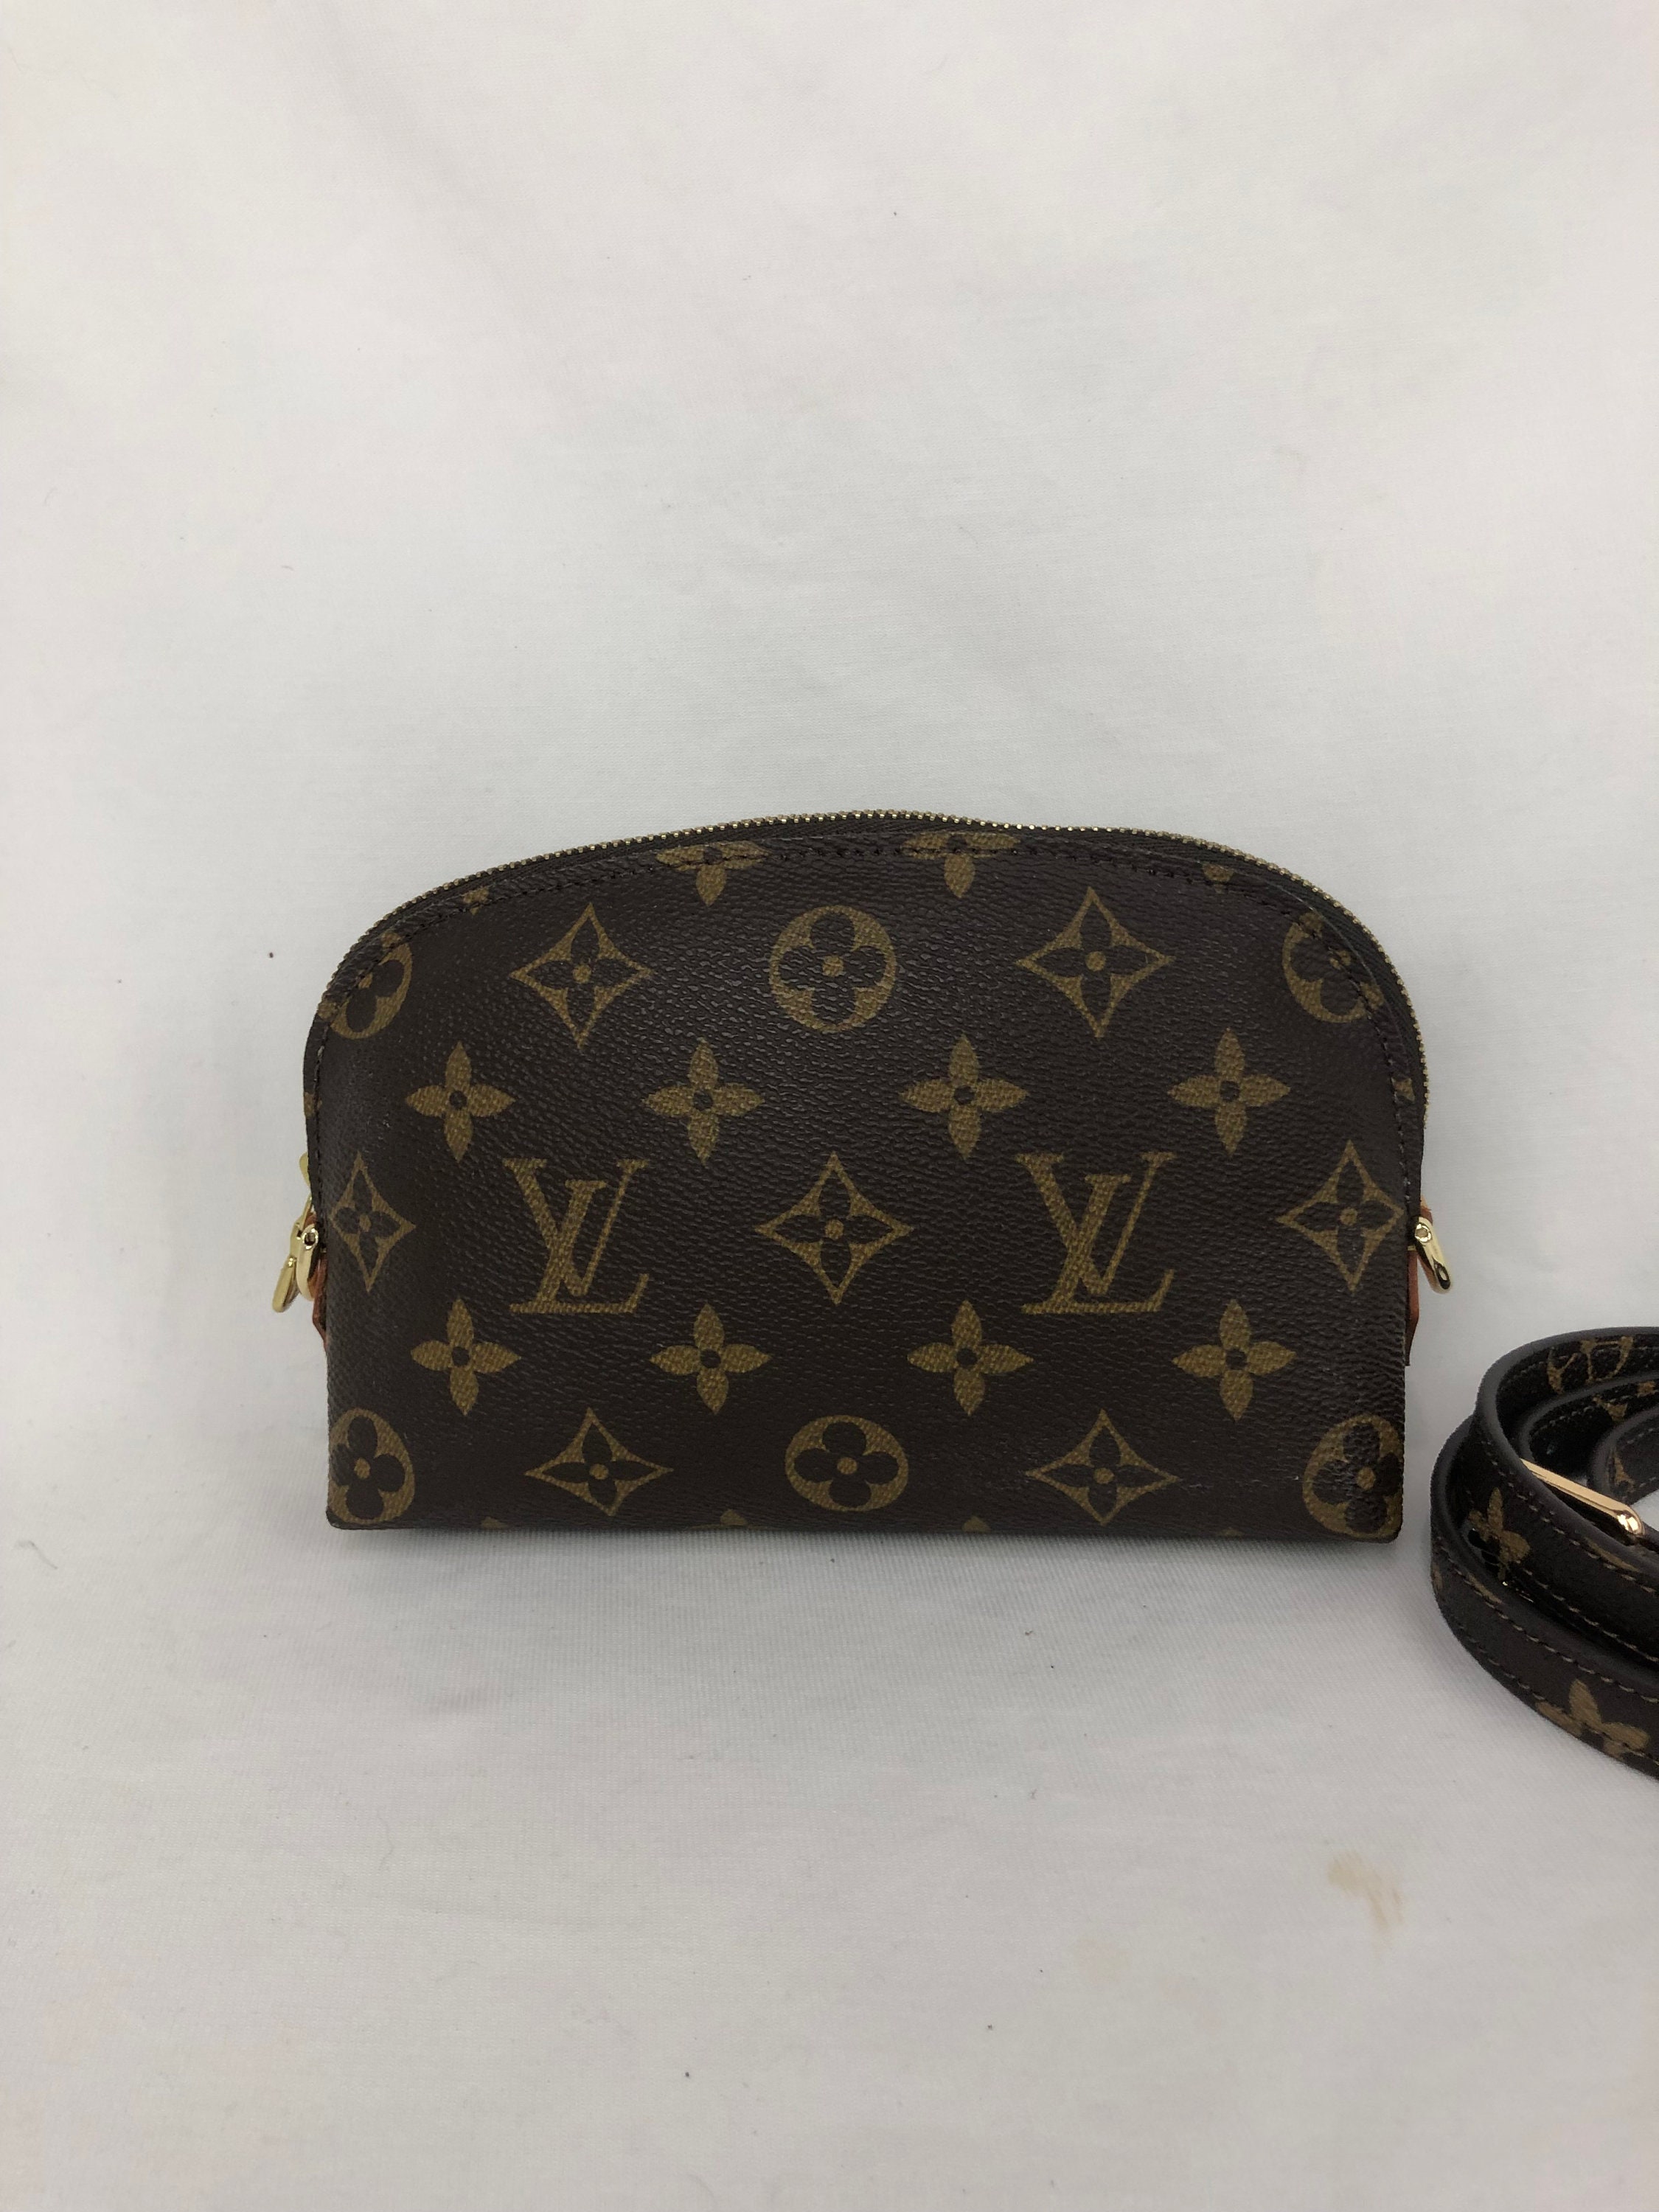 Conversion Kit for LV Cosmetic Pouch GM